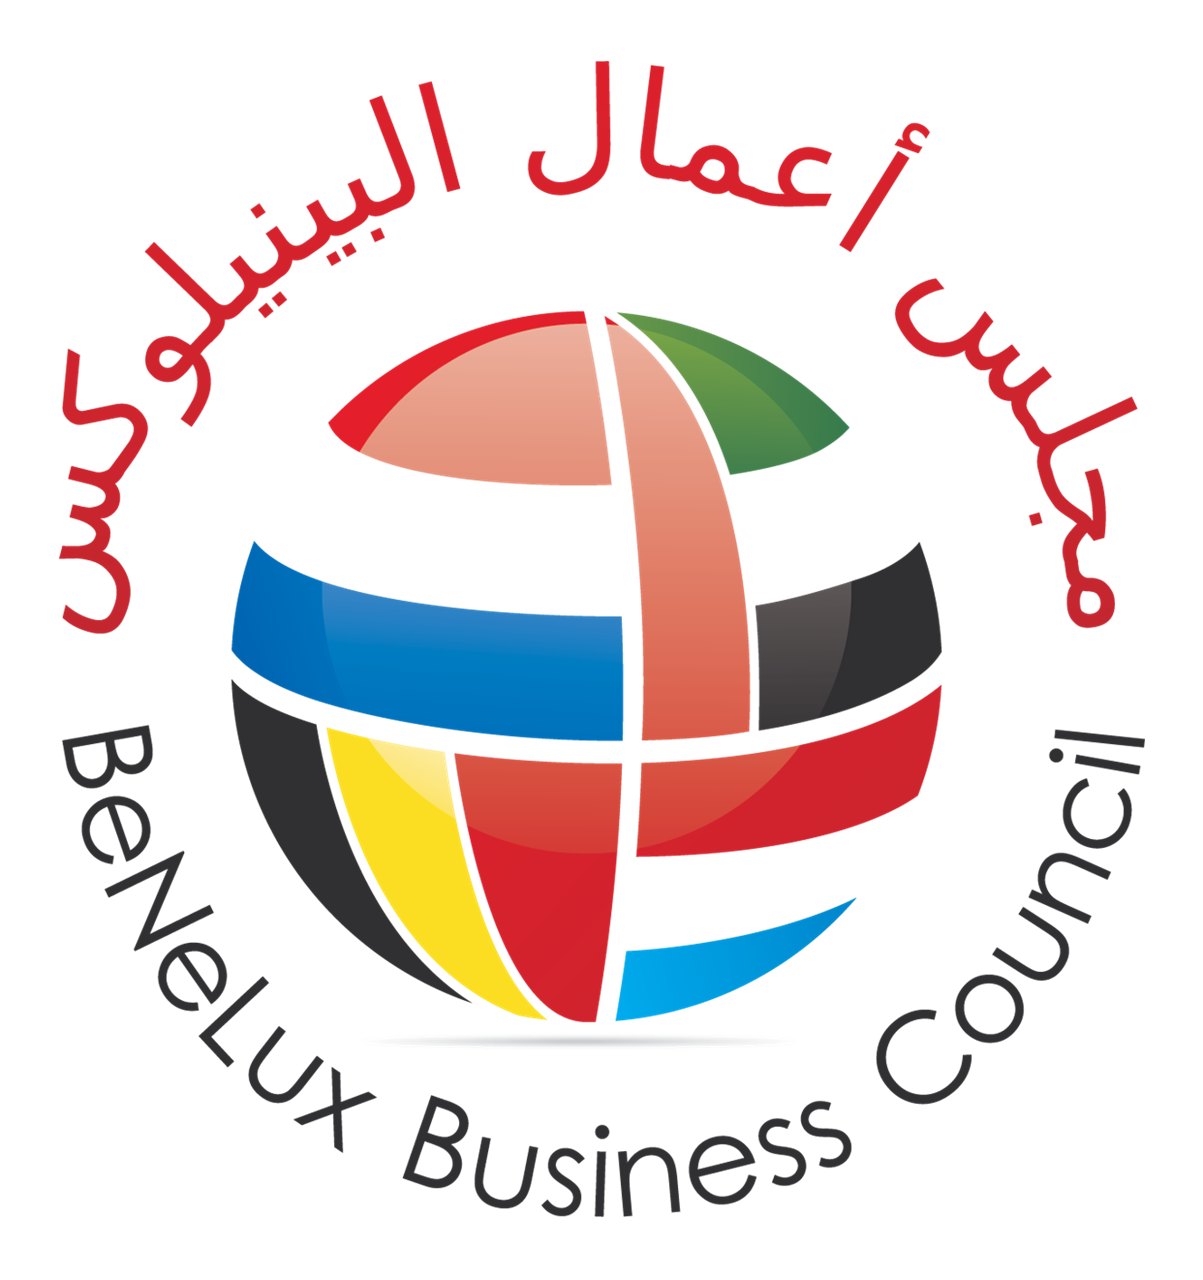 Benelux Business Council Abu Dhabi